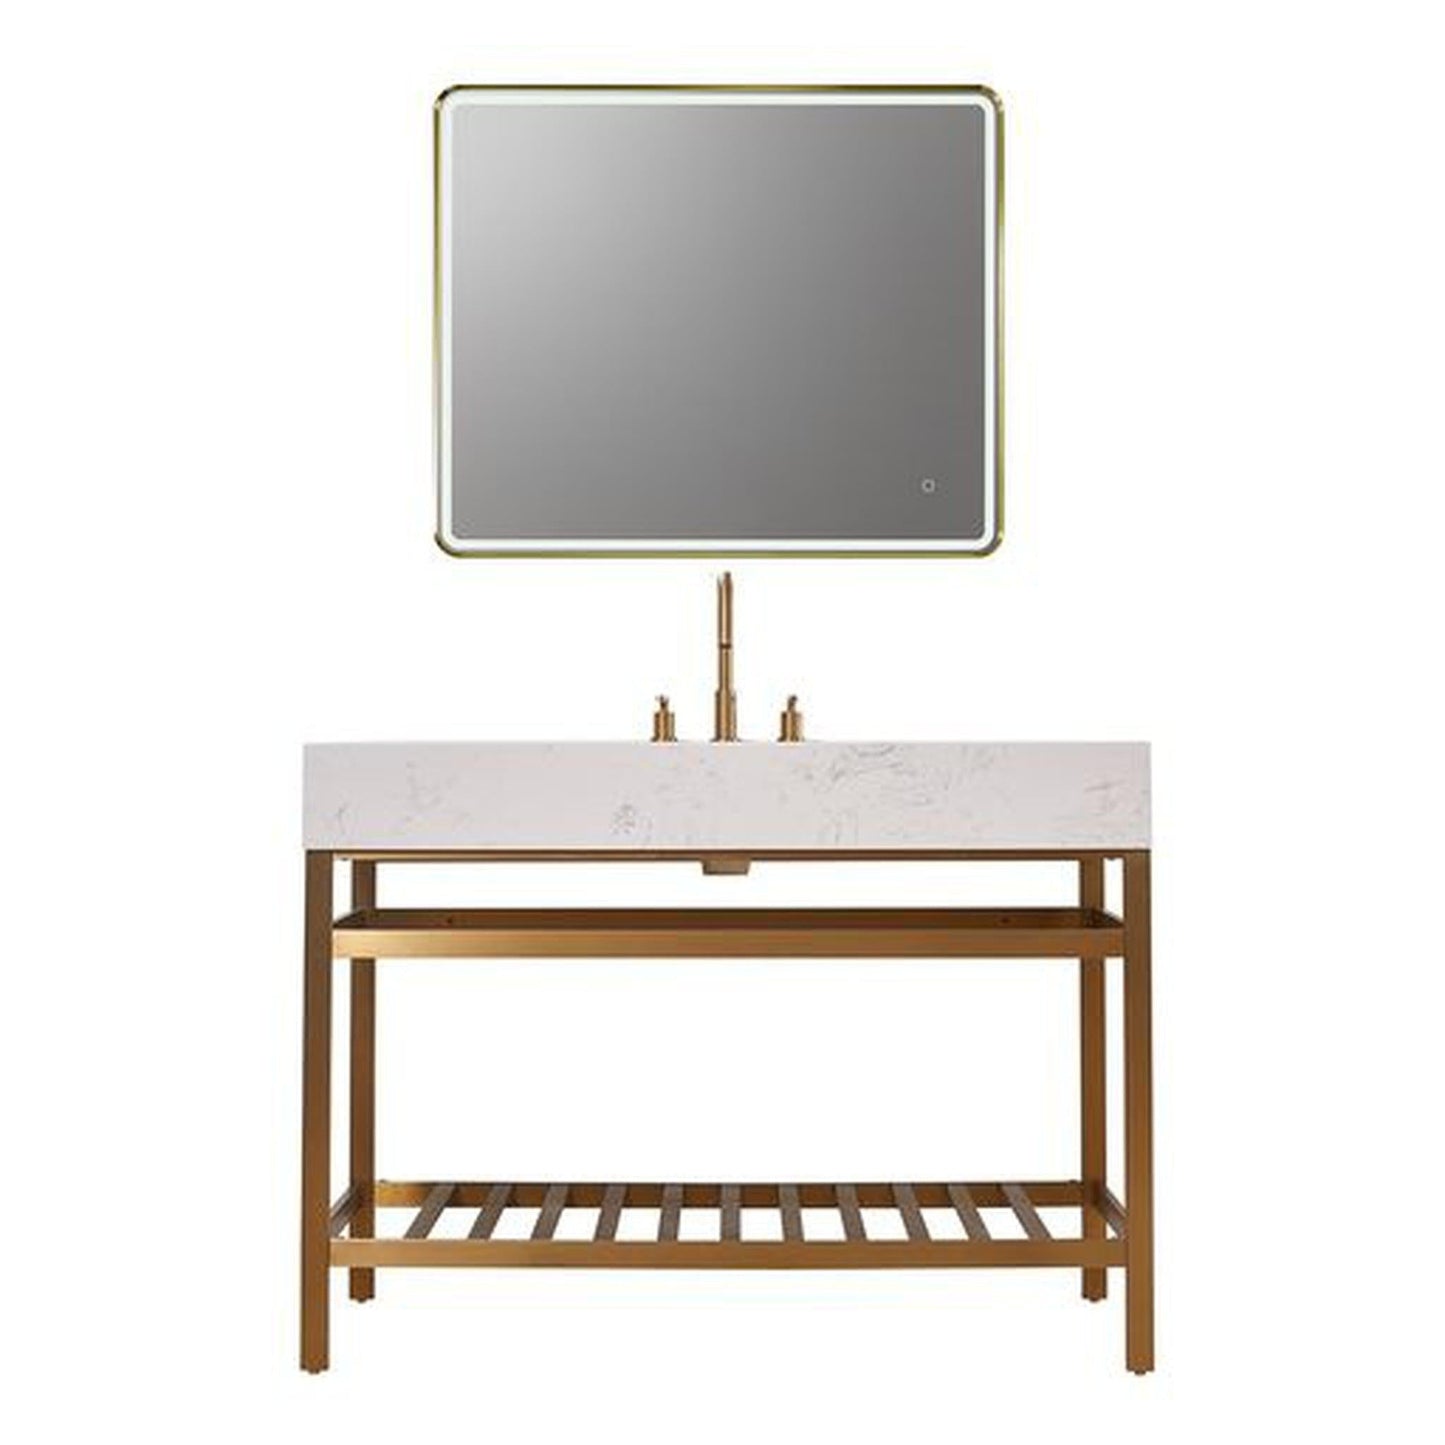 Altair Merano 48" Brushed Gold Single Stainless Steel Bathroom Vanity Set Console With Mirror, Aosta White Stone Top, Single Rectangular Undermount Ceramic Sink, and Safety Overflow Hole